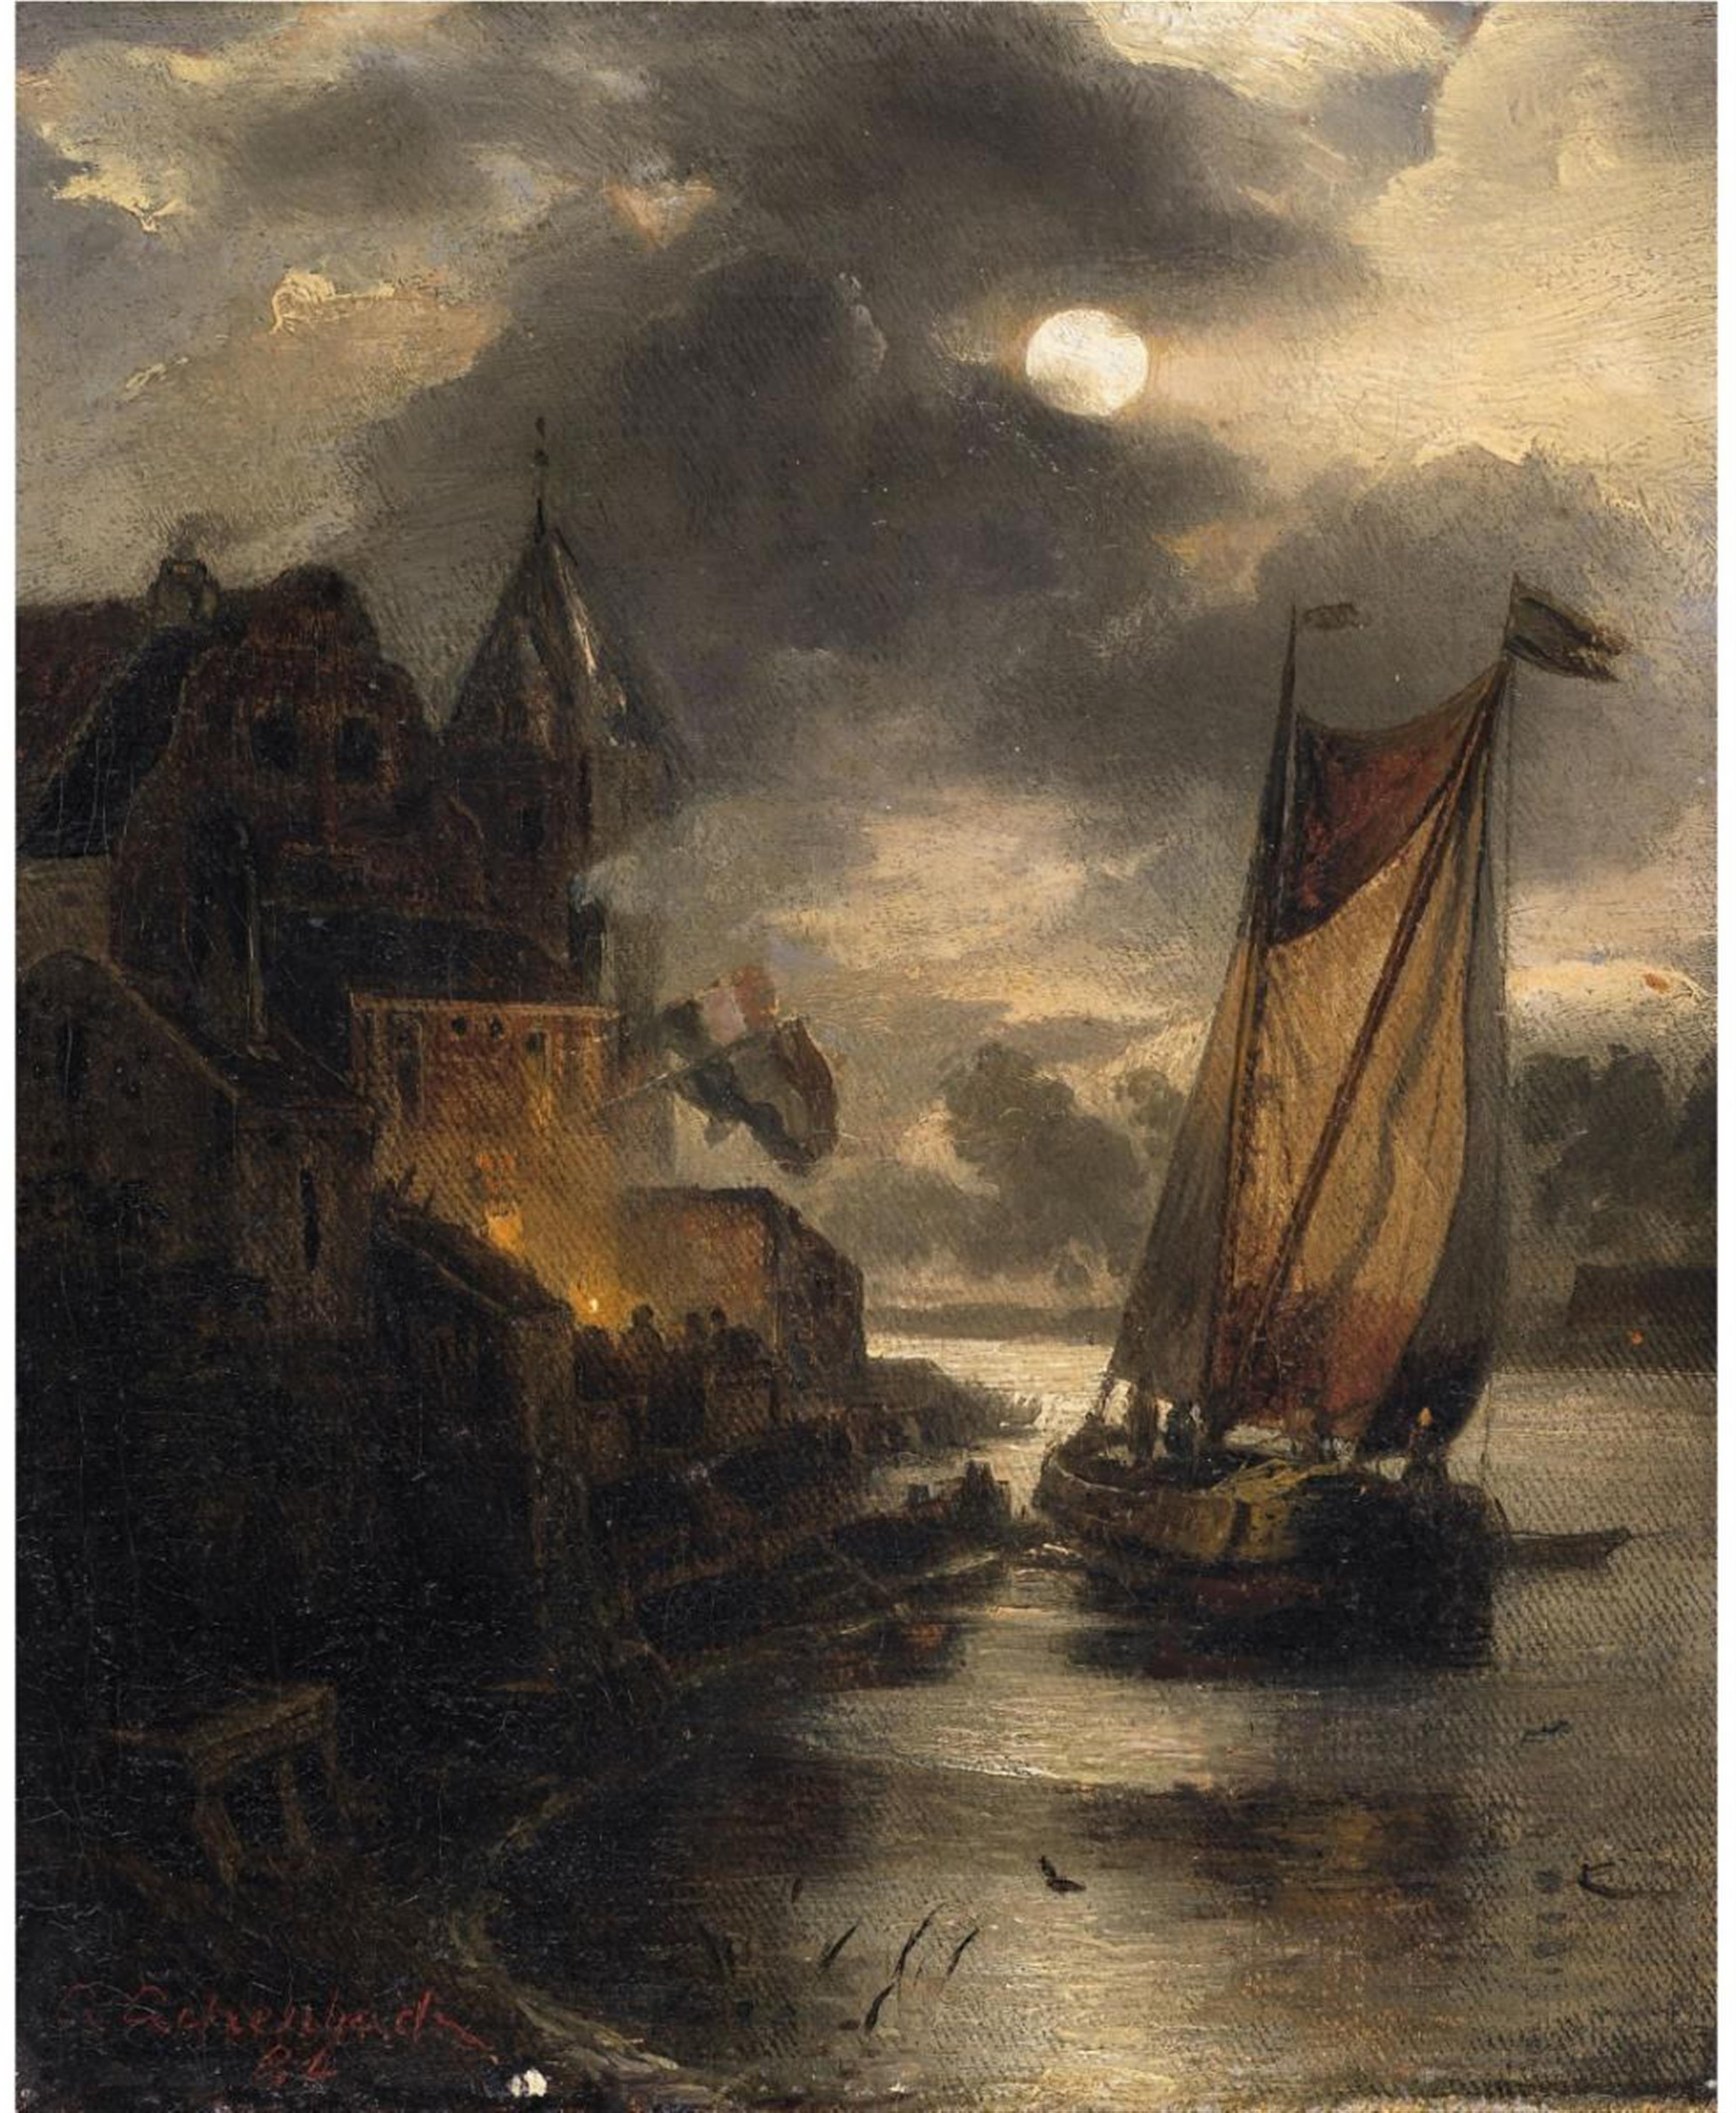 Andreas Achenbach - A VIEW OF A DUTCH COASTAL TOWN AND A SAILING BOAT BY MOONLIGHT - image-1